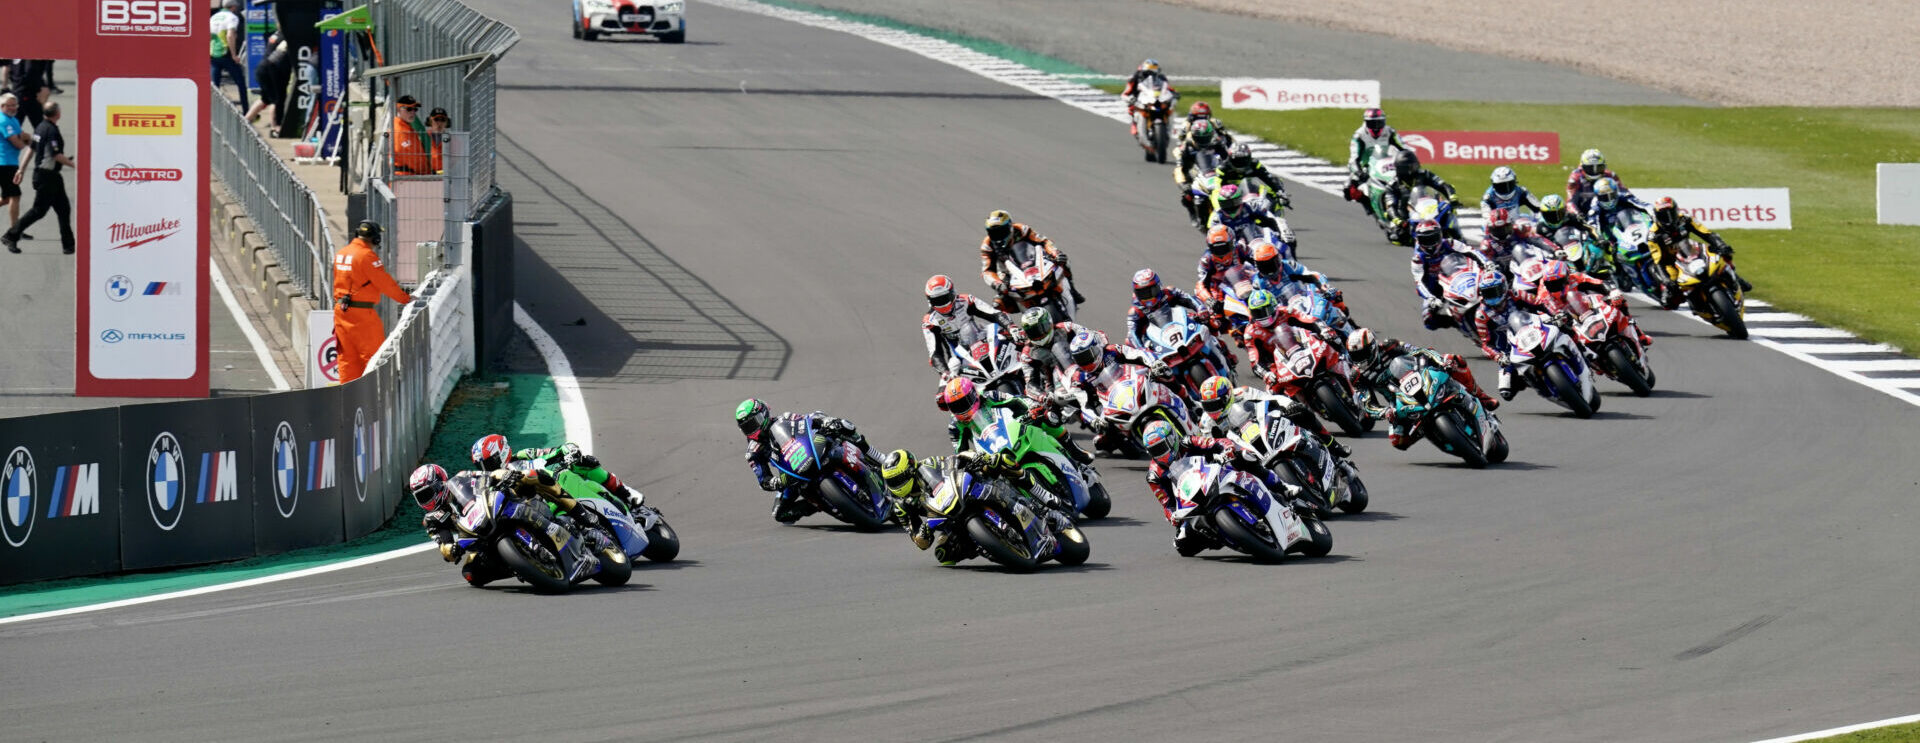 British Superbike: Final “Title Fighters” To Be Determined At Snetterton – Roadracing World Magazine